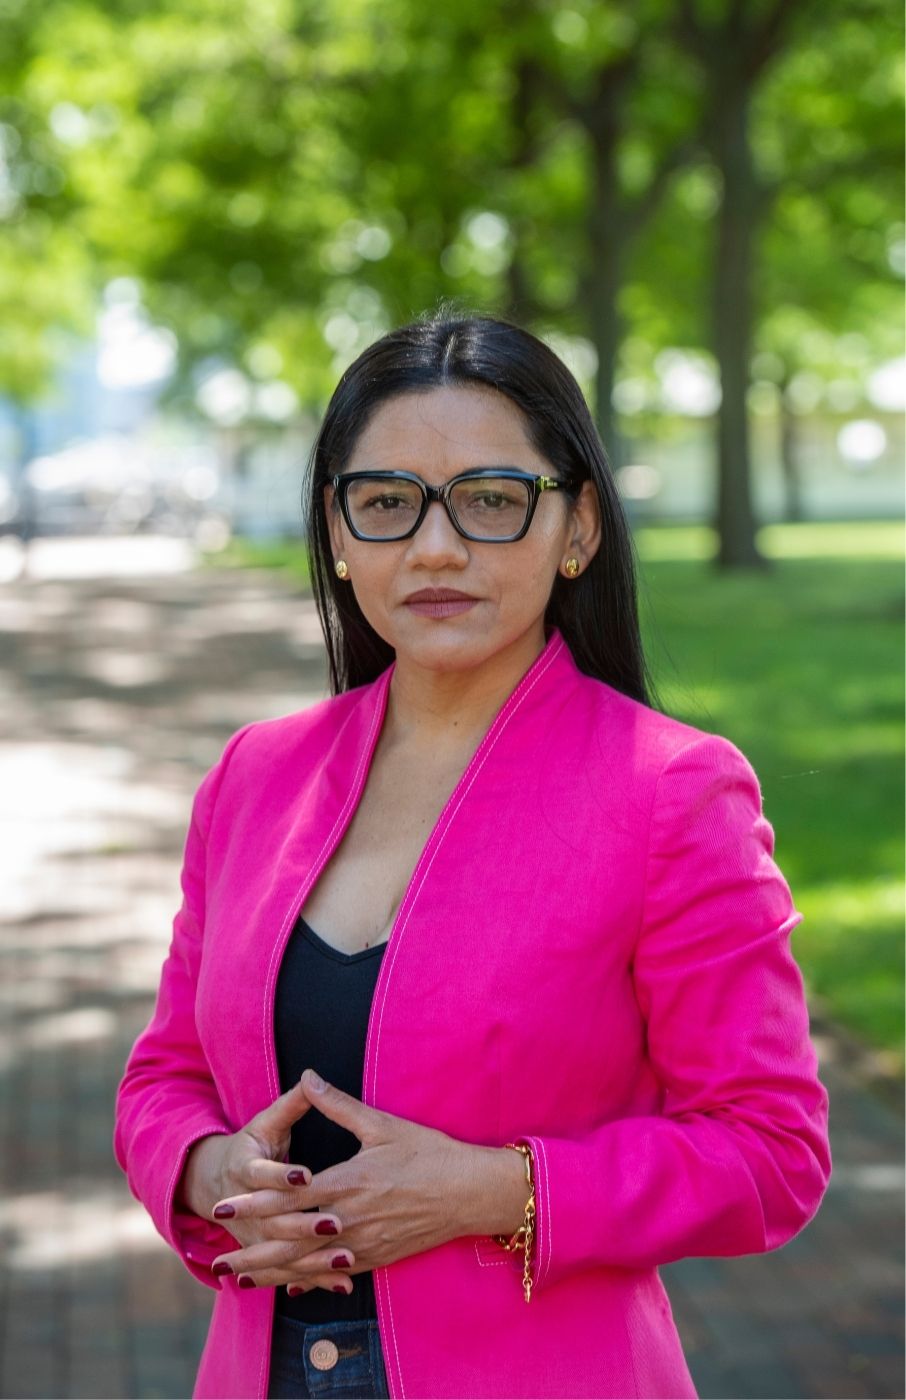 Patricia Montes standing in a park on a sunny day, green trees and grass in background. She's wearing a bright pink blazer, a black shirt and dark blue jeans. She has dark rimmed glasses. She's wearing her long dark hair down.